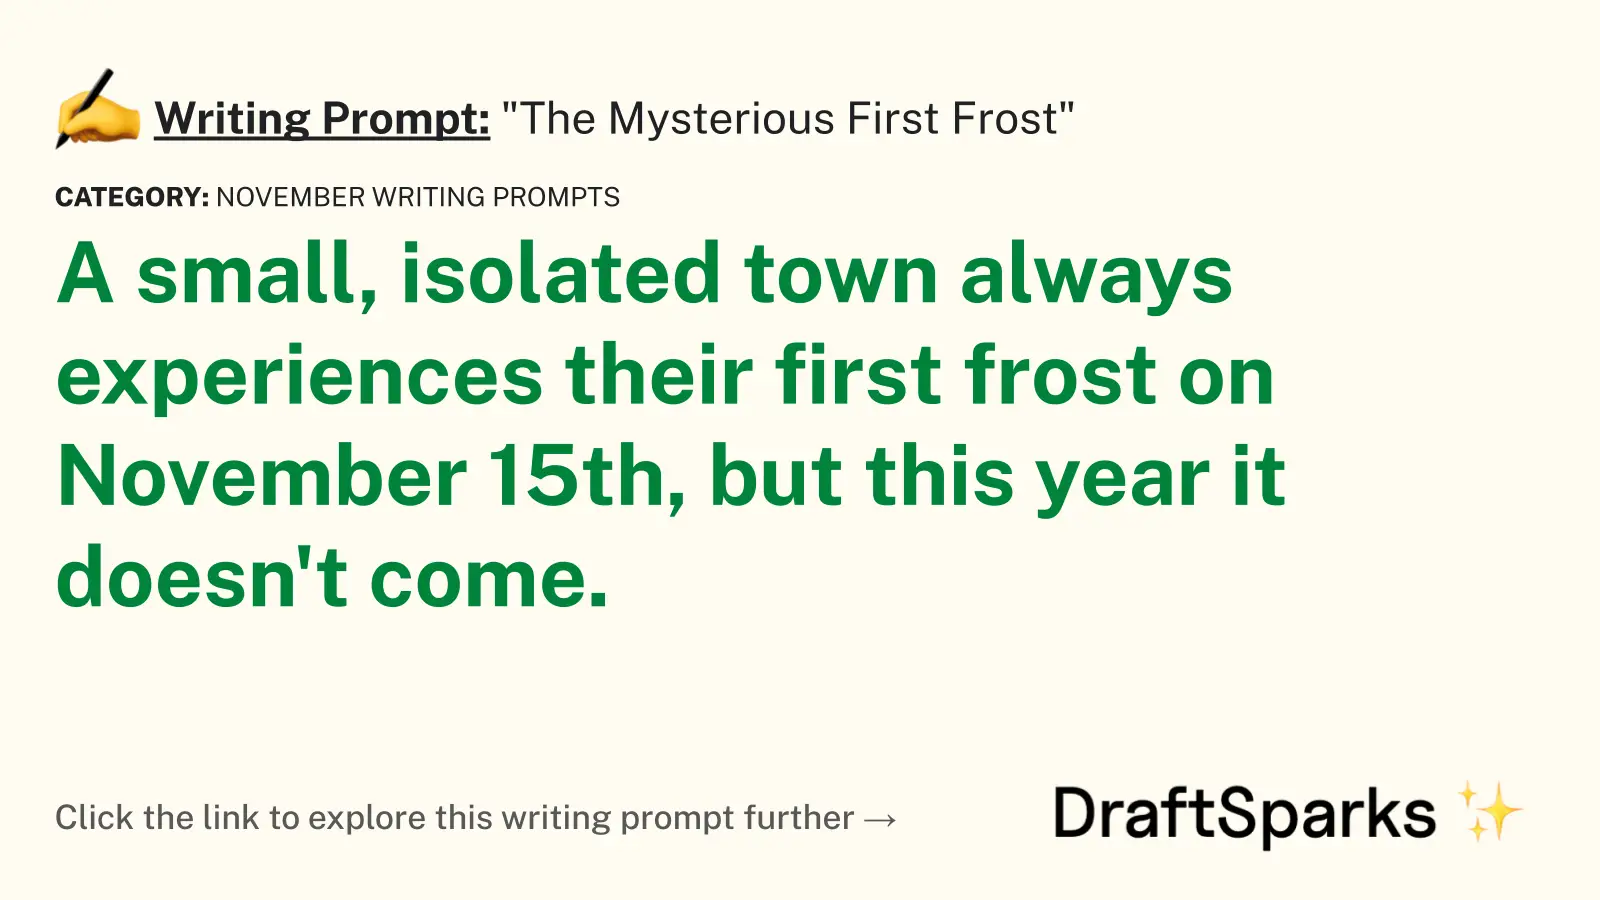 “The Mysterious First Frost”